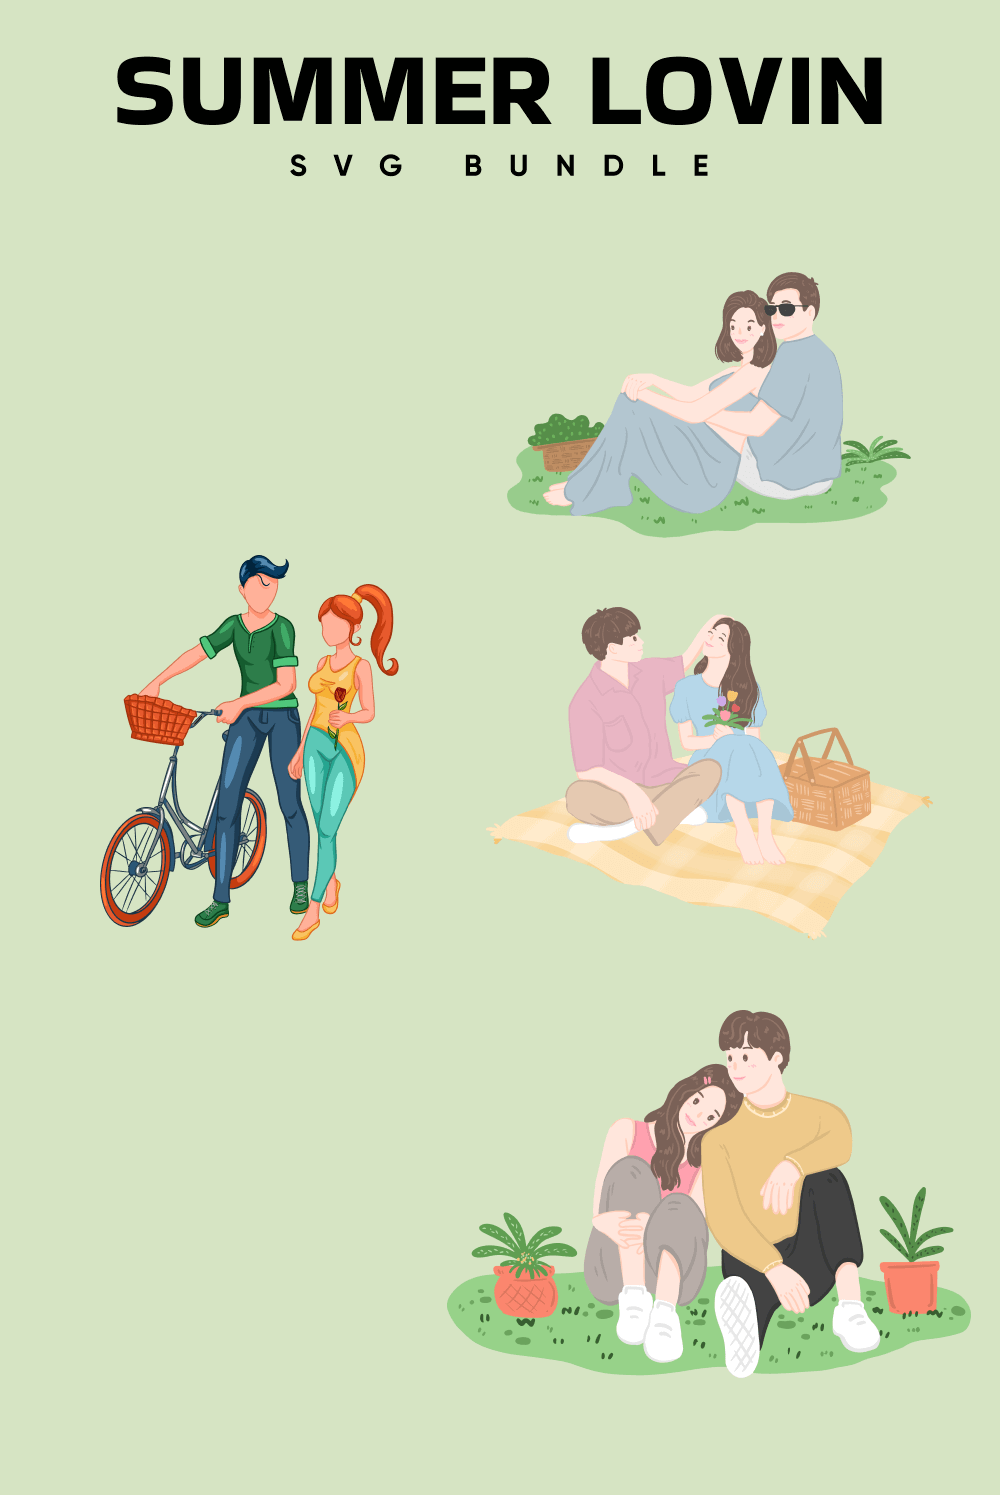 People in love go for a bike ride, have a picnic and just walk in nature.